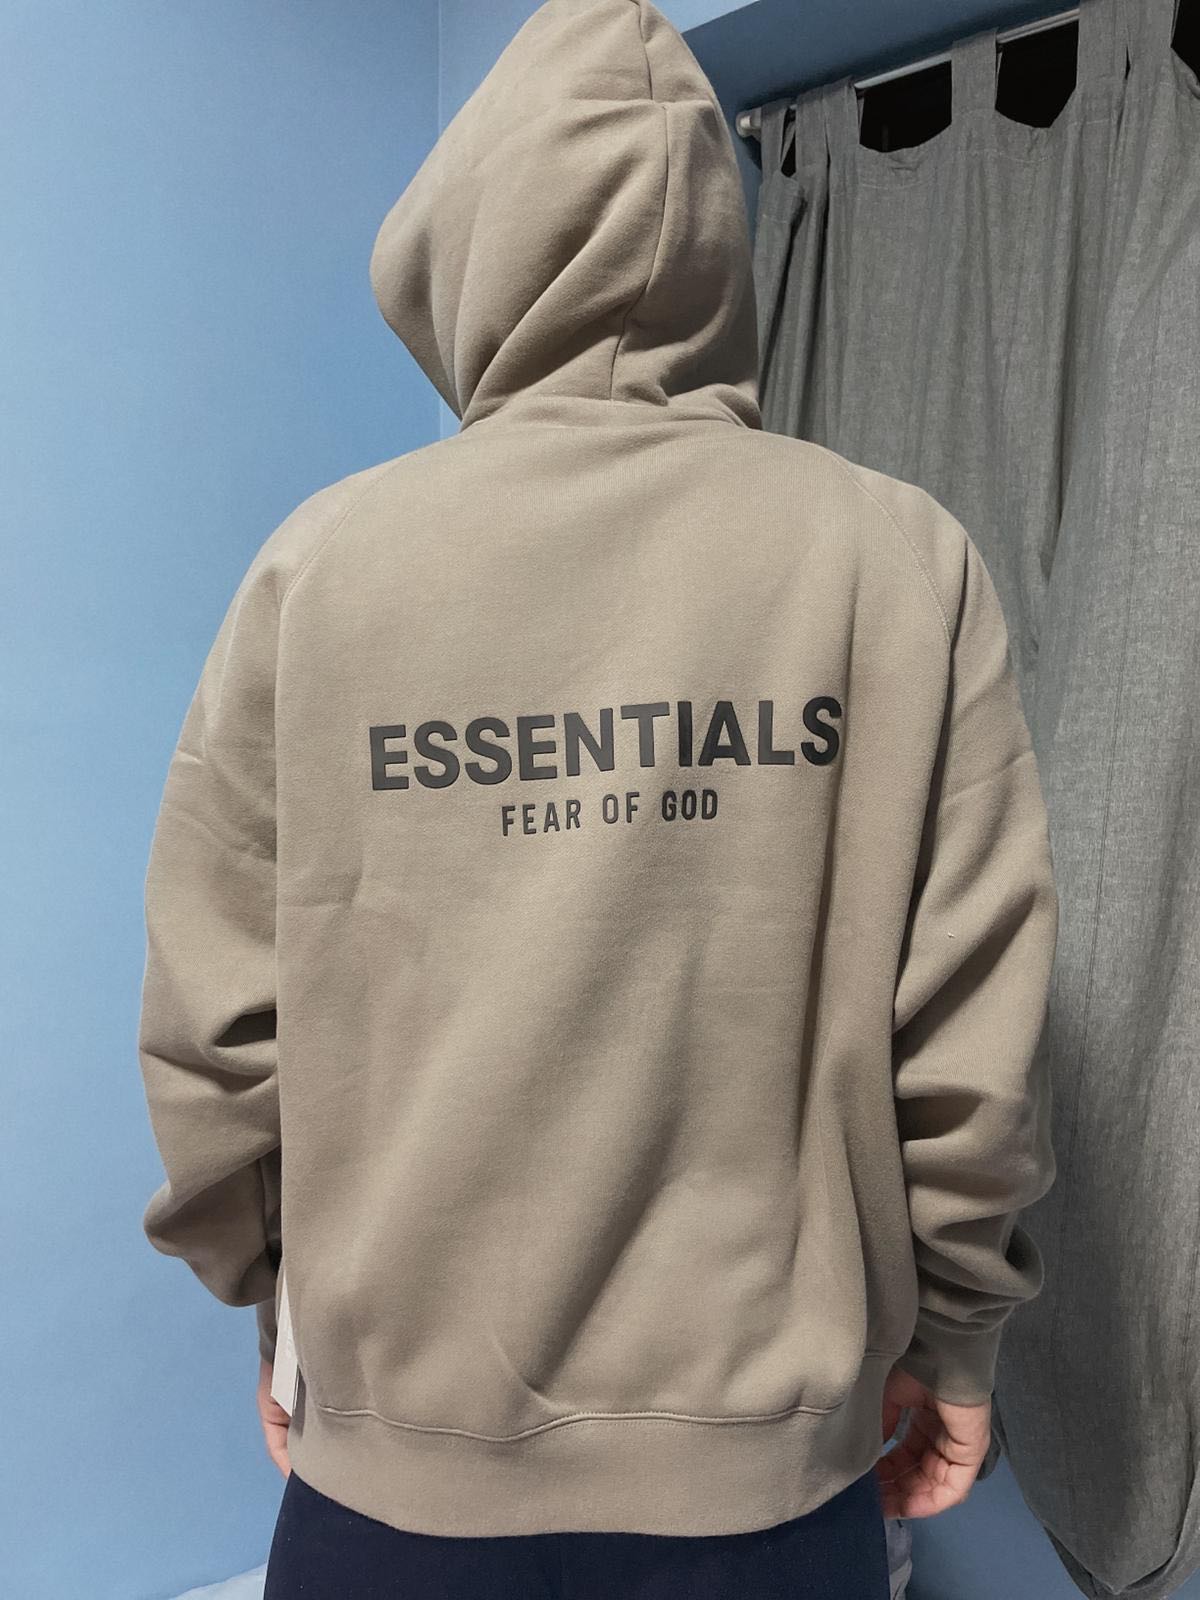 Fear of god Essentials SS21 Hoodie taupe size S/Men&Women, Men's